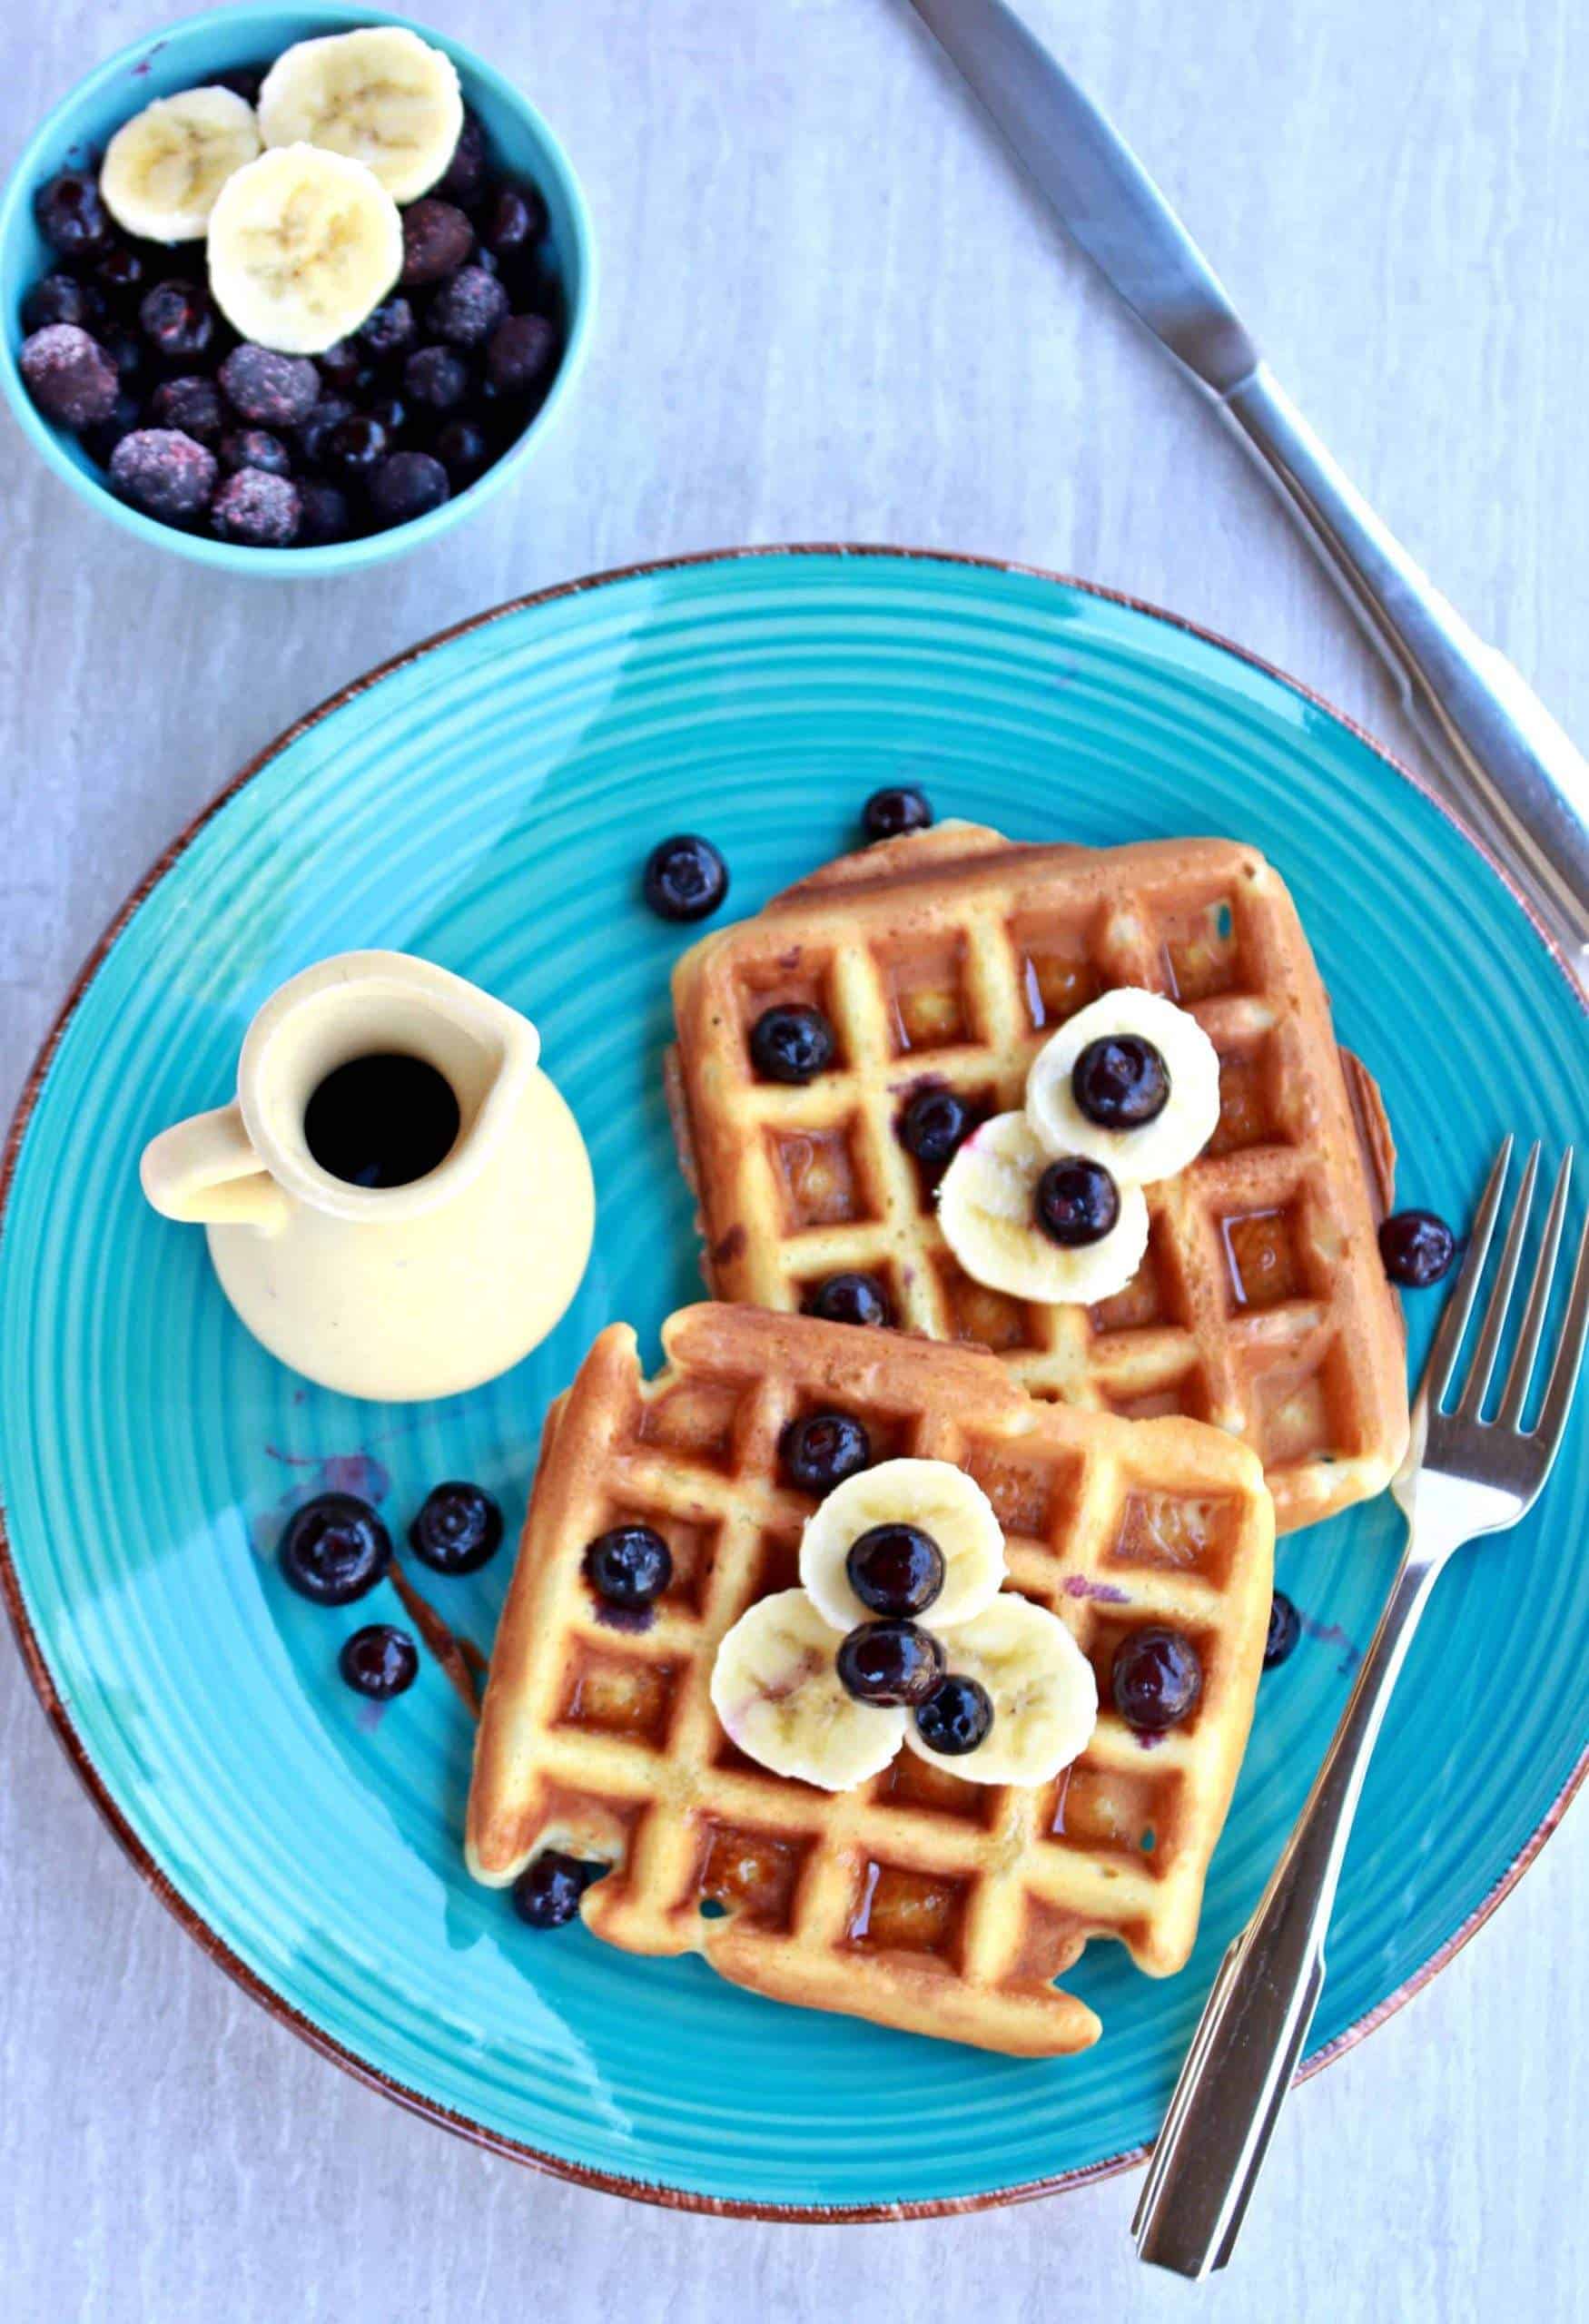 Waffles with syrup and blueberries